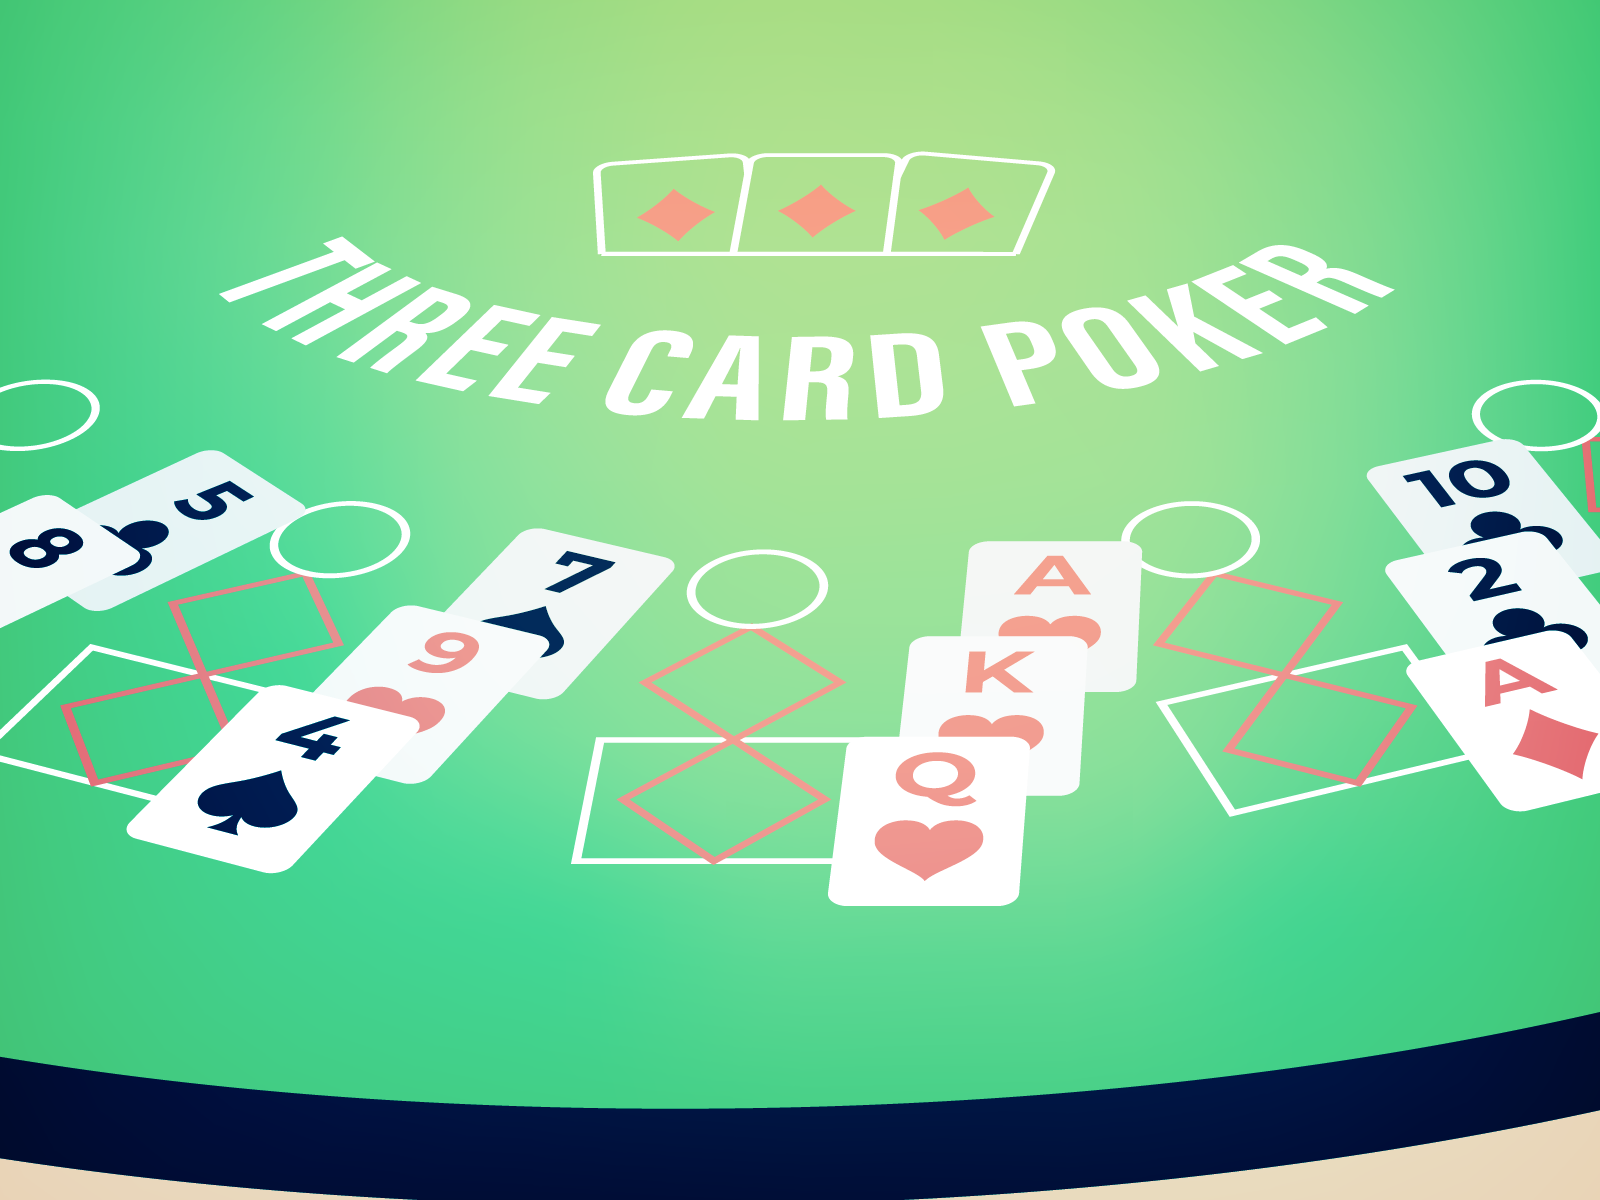 3-card poker table